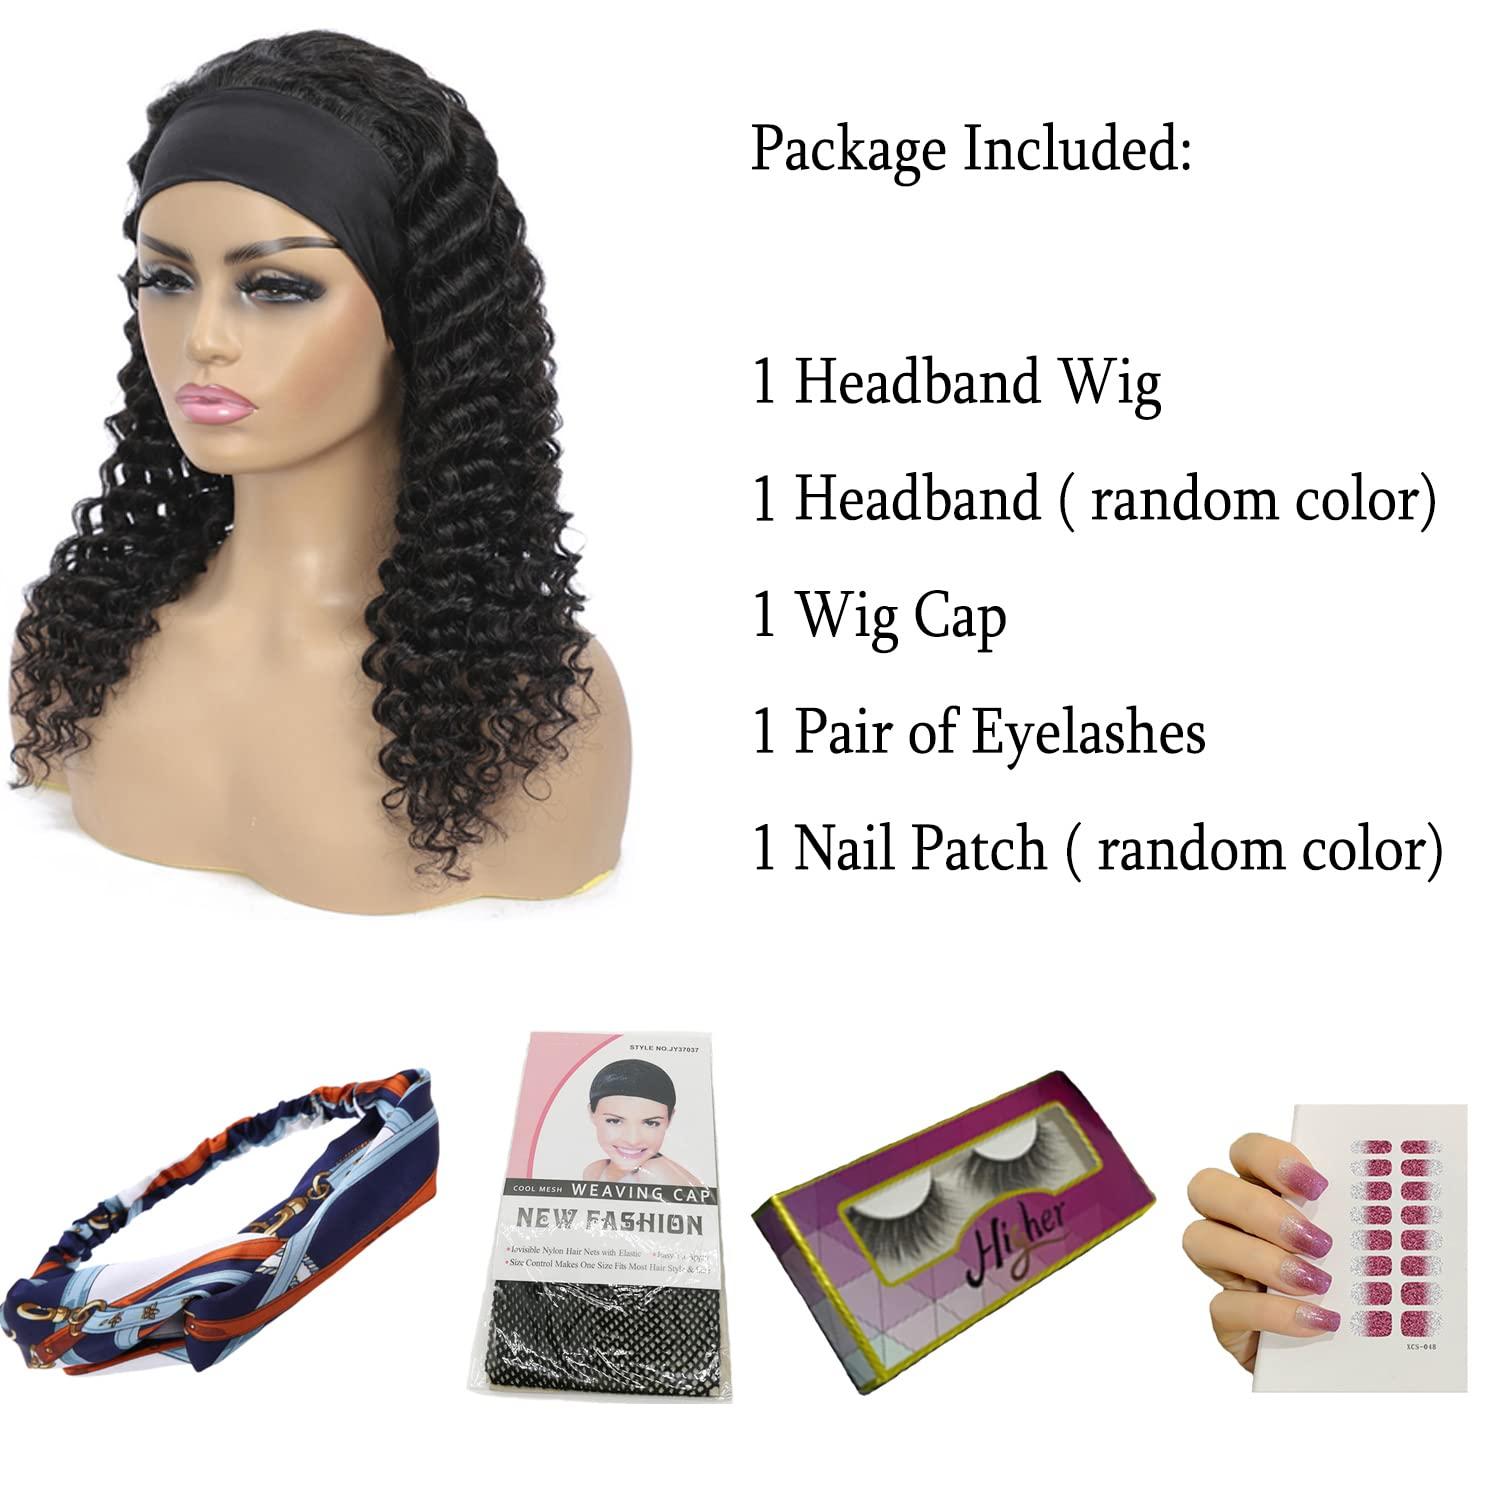 Headband Wig Human Hair Deep Wave 16 Inch Wigs for Black Women Glueless  None Lace Front Curly Wave Wig Brazilian Virgin Hair Wear and Go Wigs  Machine Made 150% Density Wigs Natural